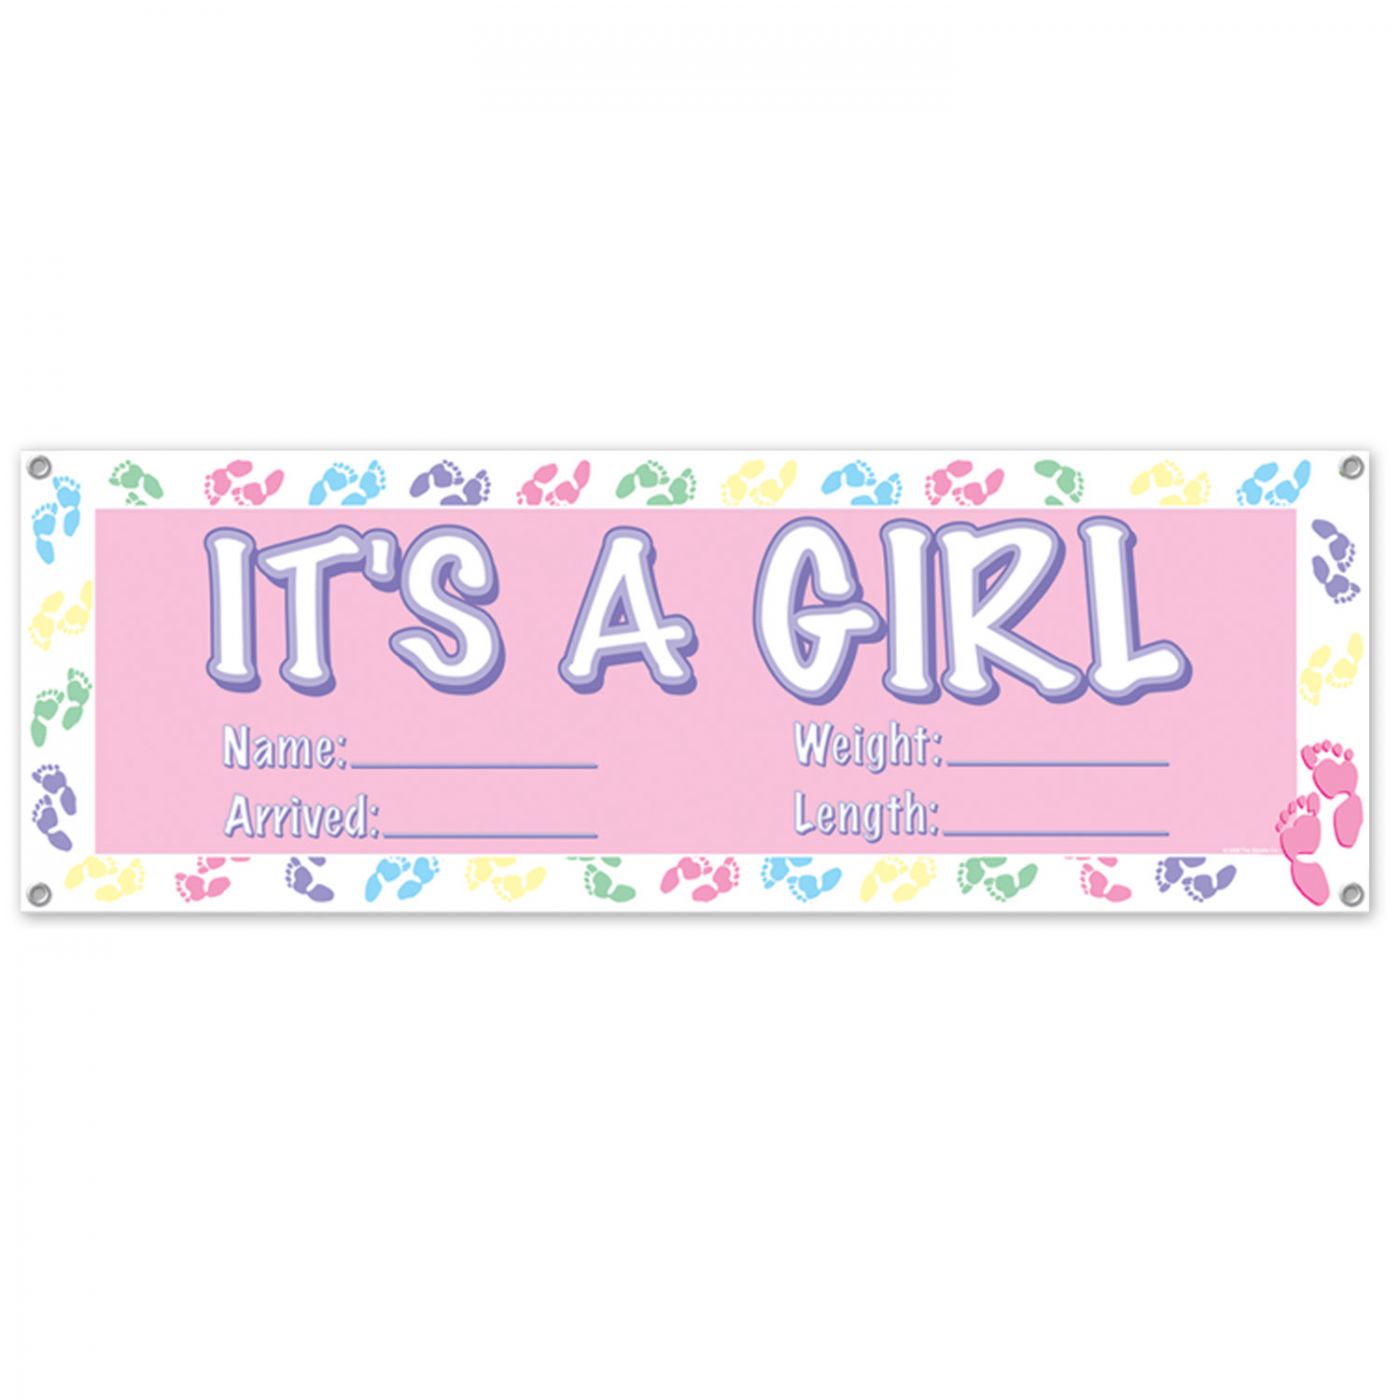 It's A Girl Sign Banner image